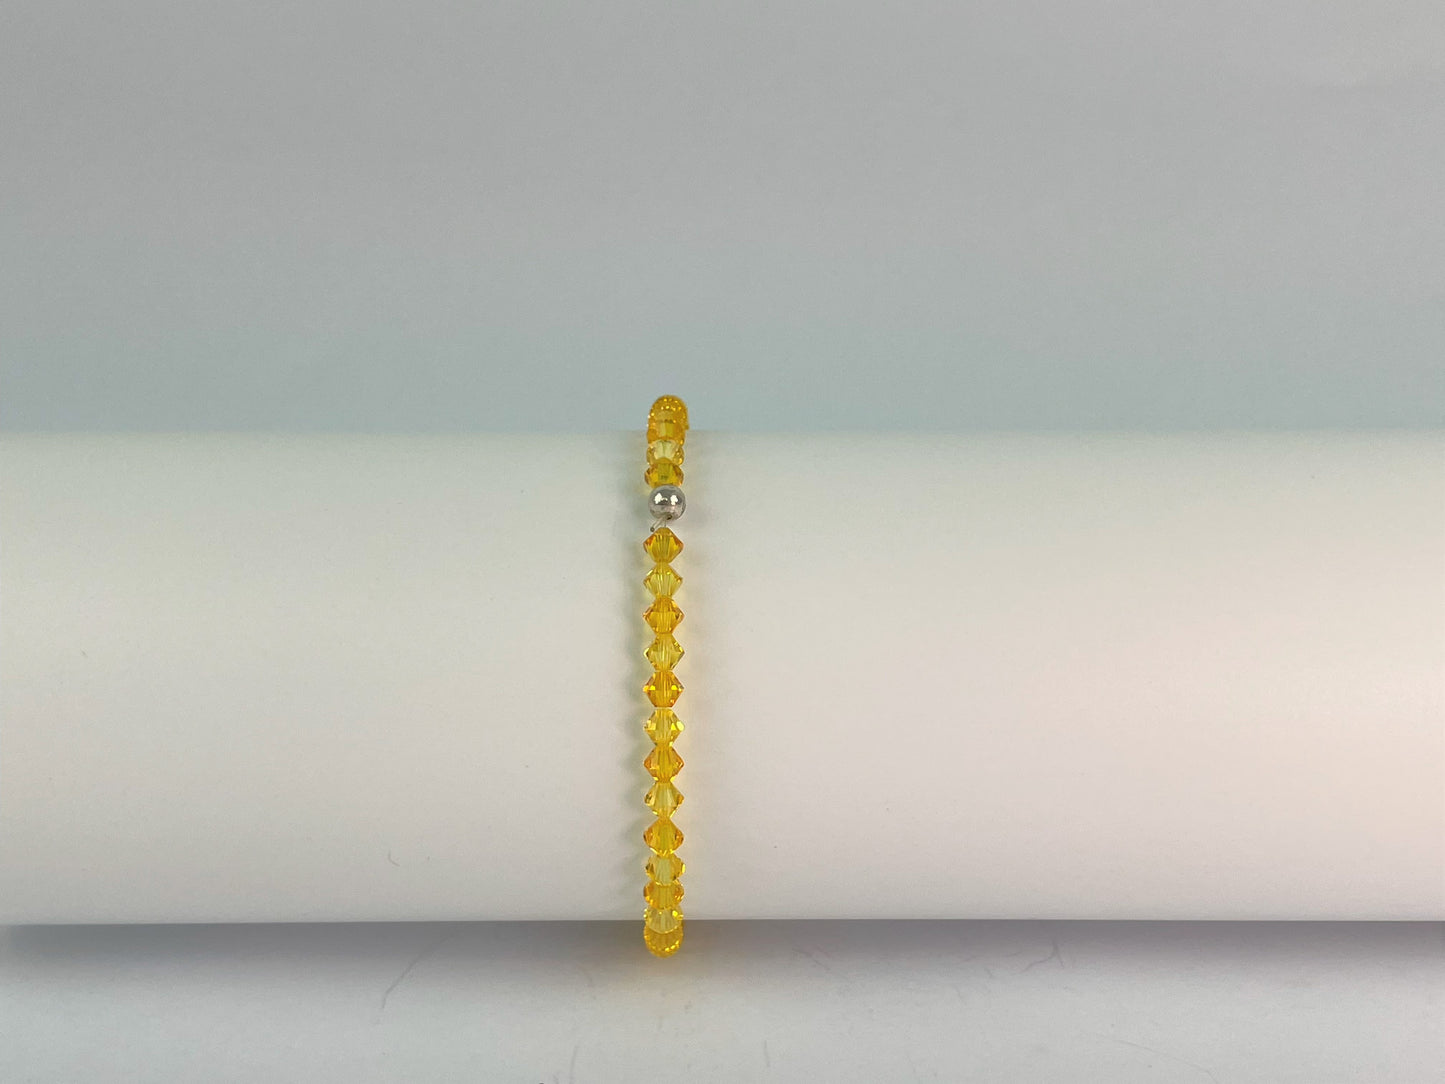 sunshine yellow crystal elasticated bracelet finished with a small silver bead